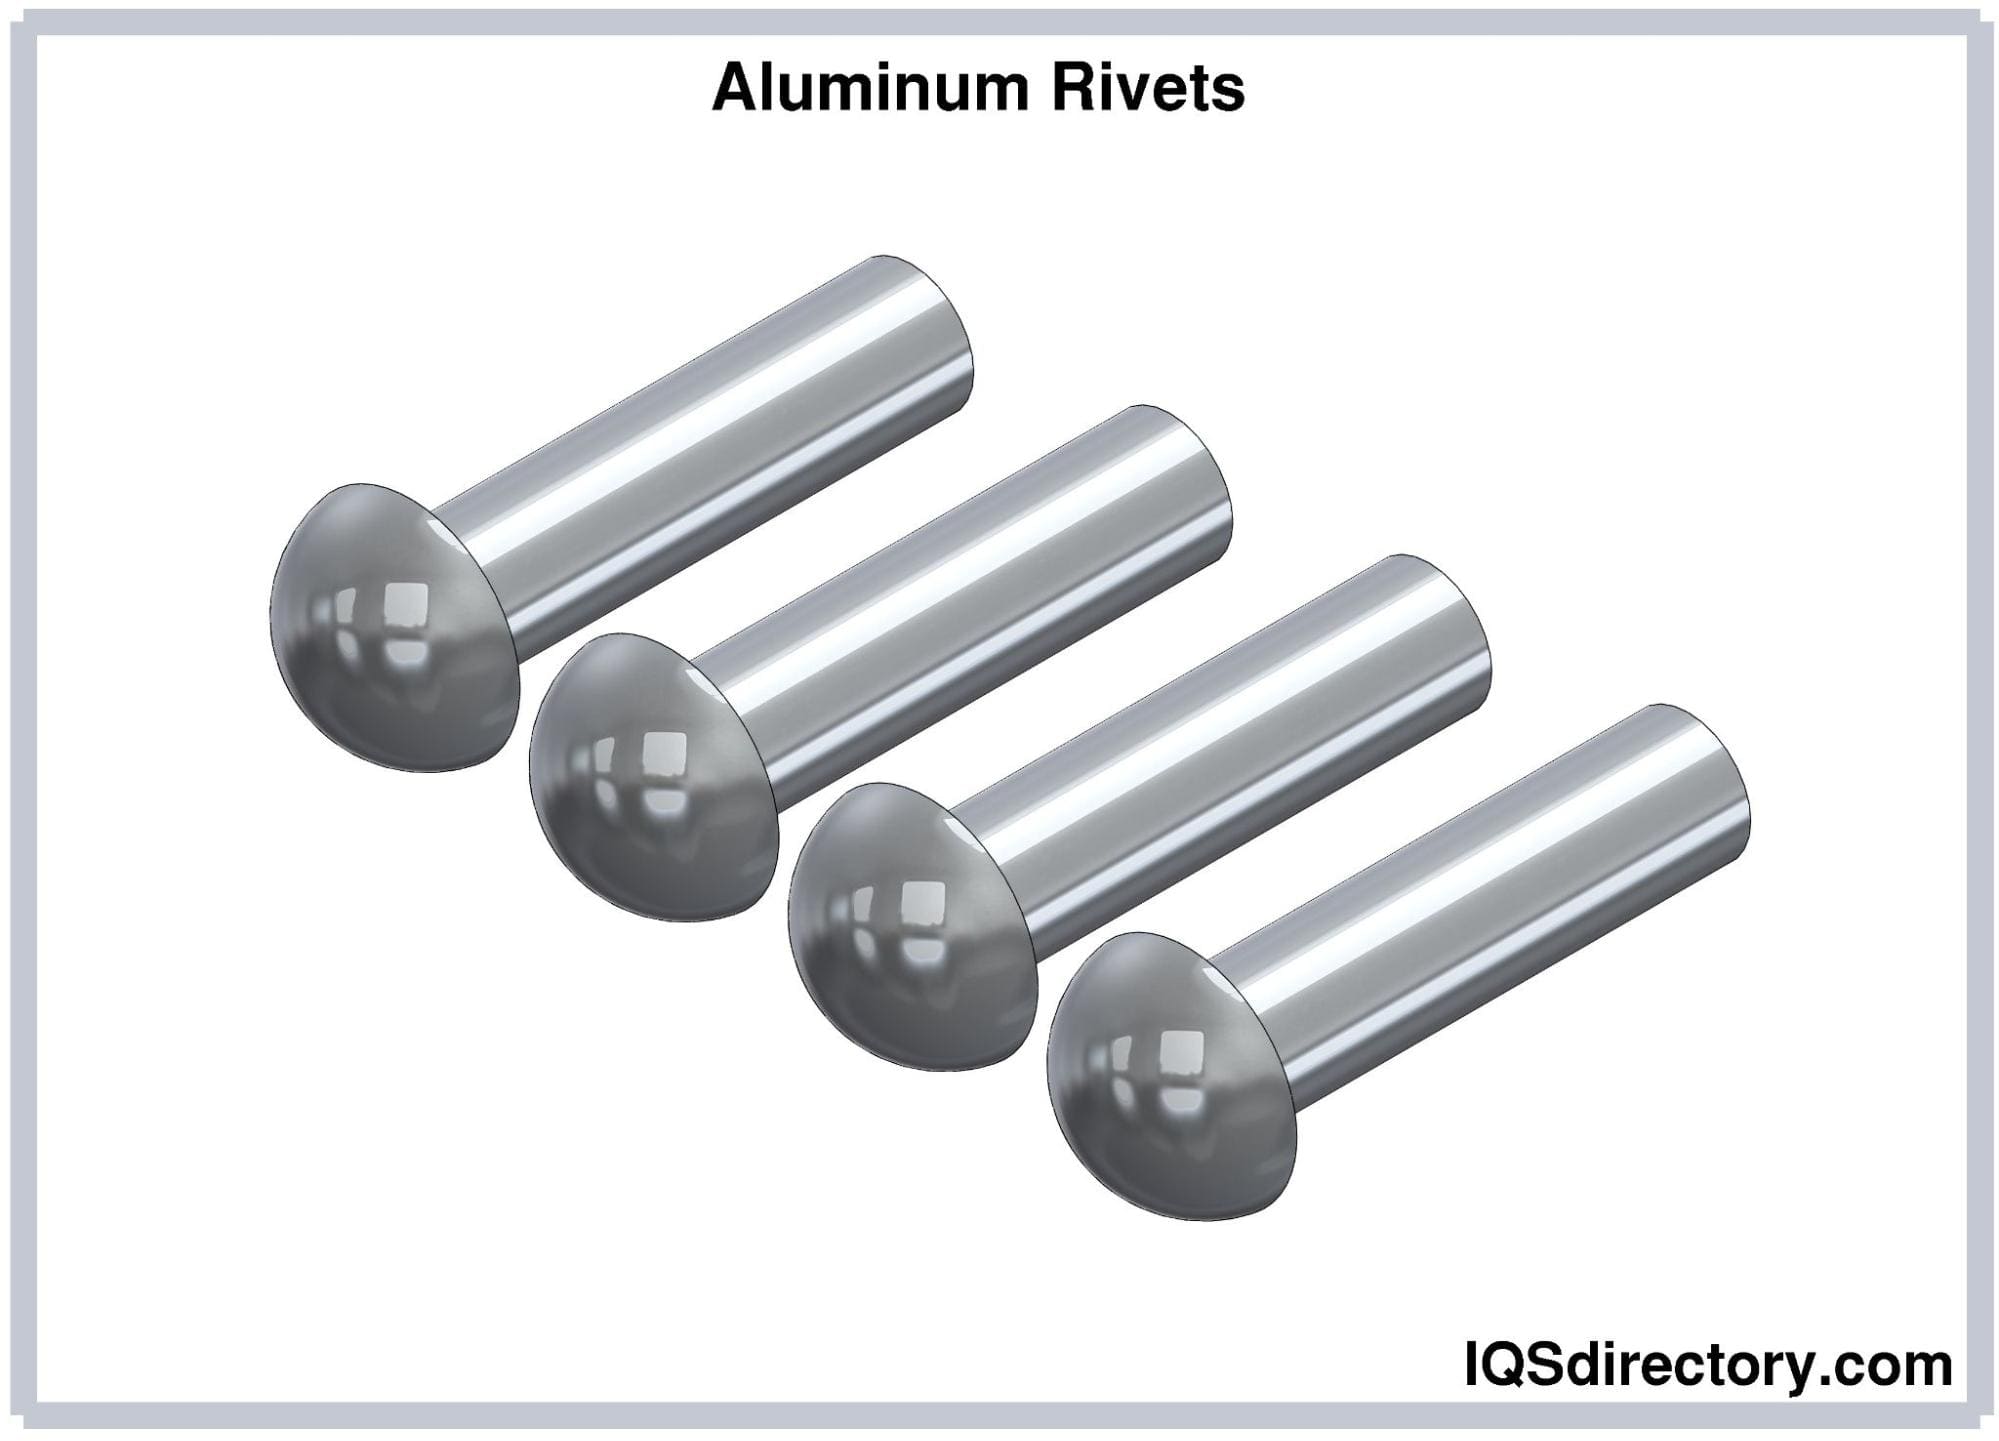 Aluminium Grades: What Do They Mean & Why Do They Matter